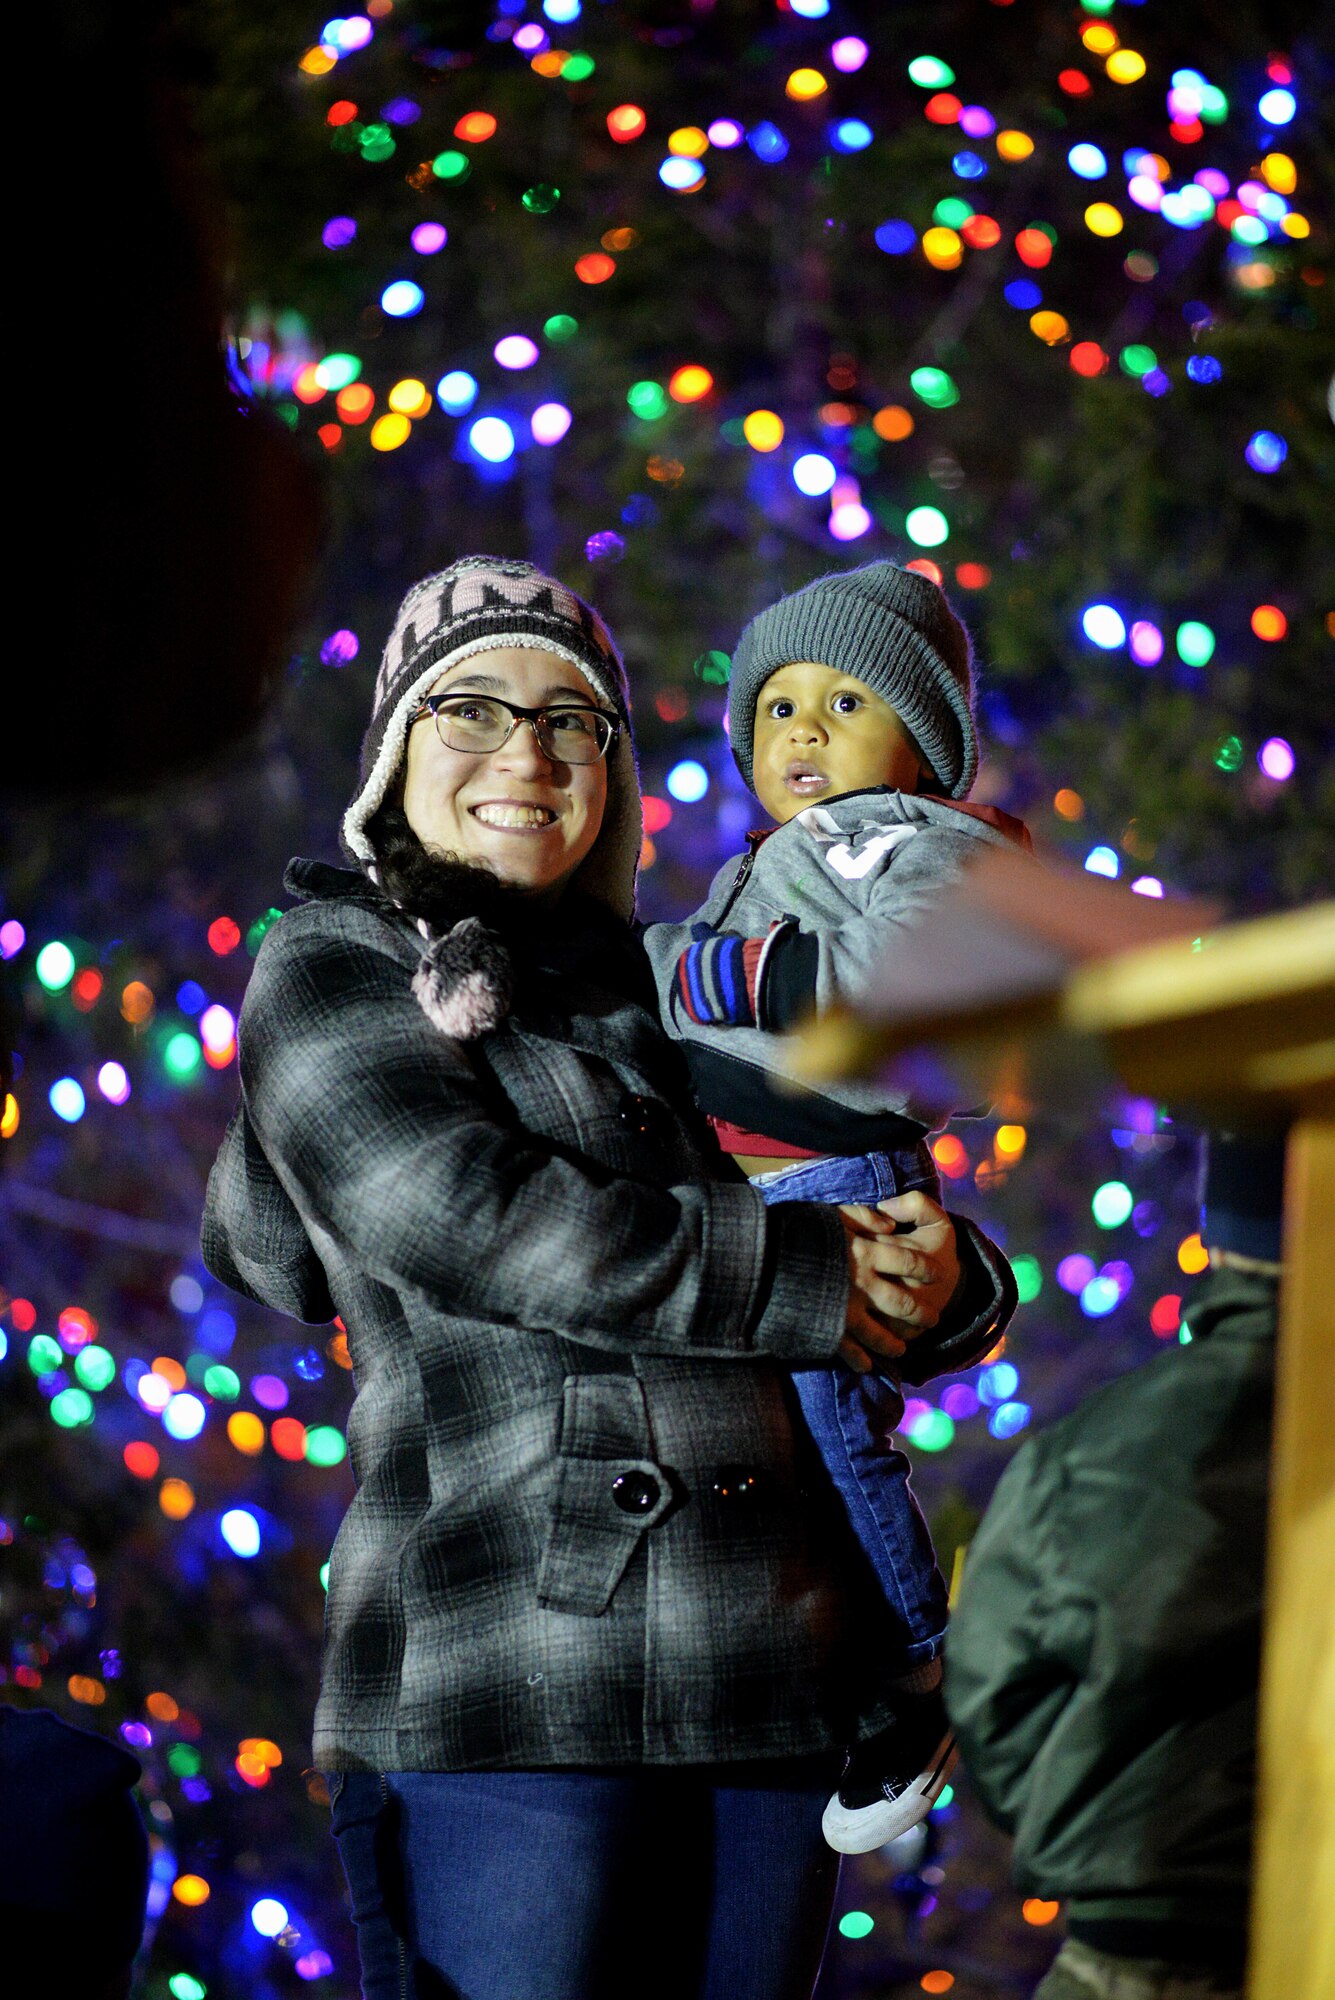 Jo Jackson and her son, Desmond, smile after helping light the 2019 Team BLAZE Christmas tree in honor of deployed Columbus Air Force Base Airmen on Dec. 3, 2019, at Columbus Air Force Base, Miss. Jackson’s husband has been, and will be deployed during the holiday season. (U.S. Air Force photo by Senior Airman Keith Holcomb)